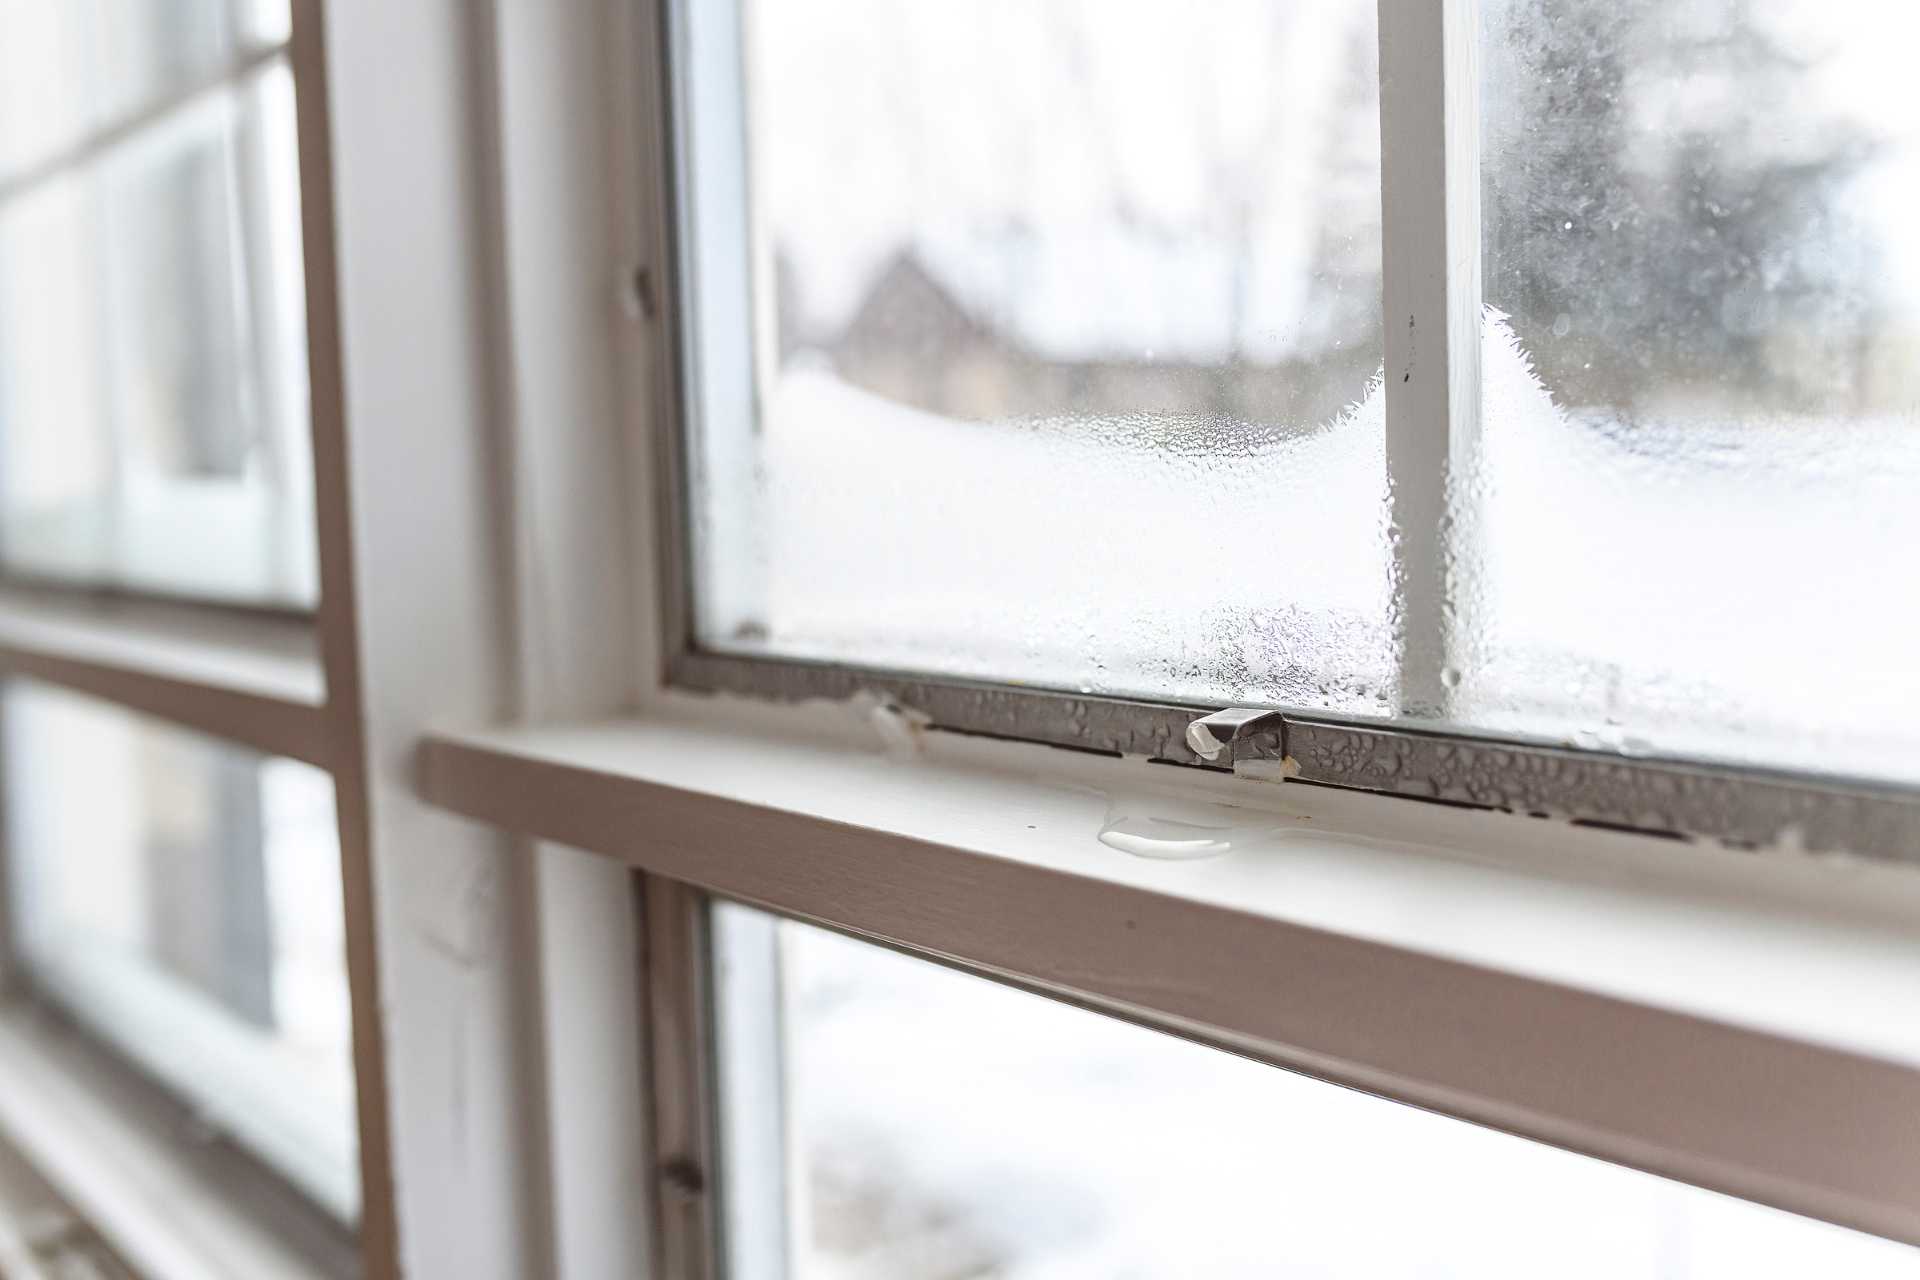 Understanding Condensation Between Window Panes and Why There's Moisture Inside